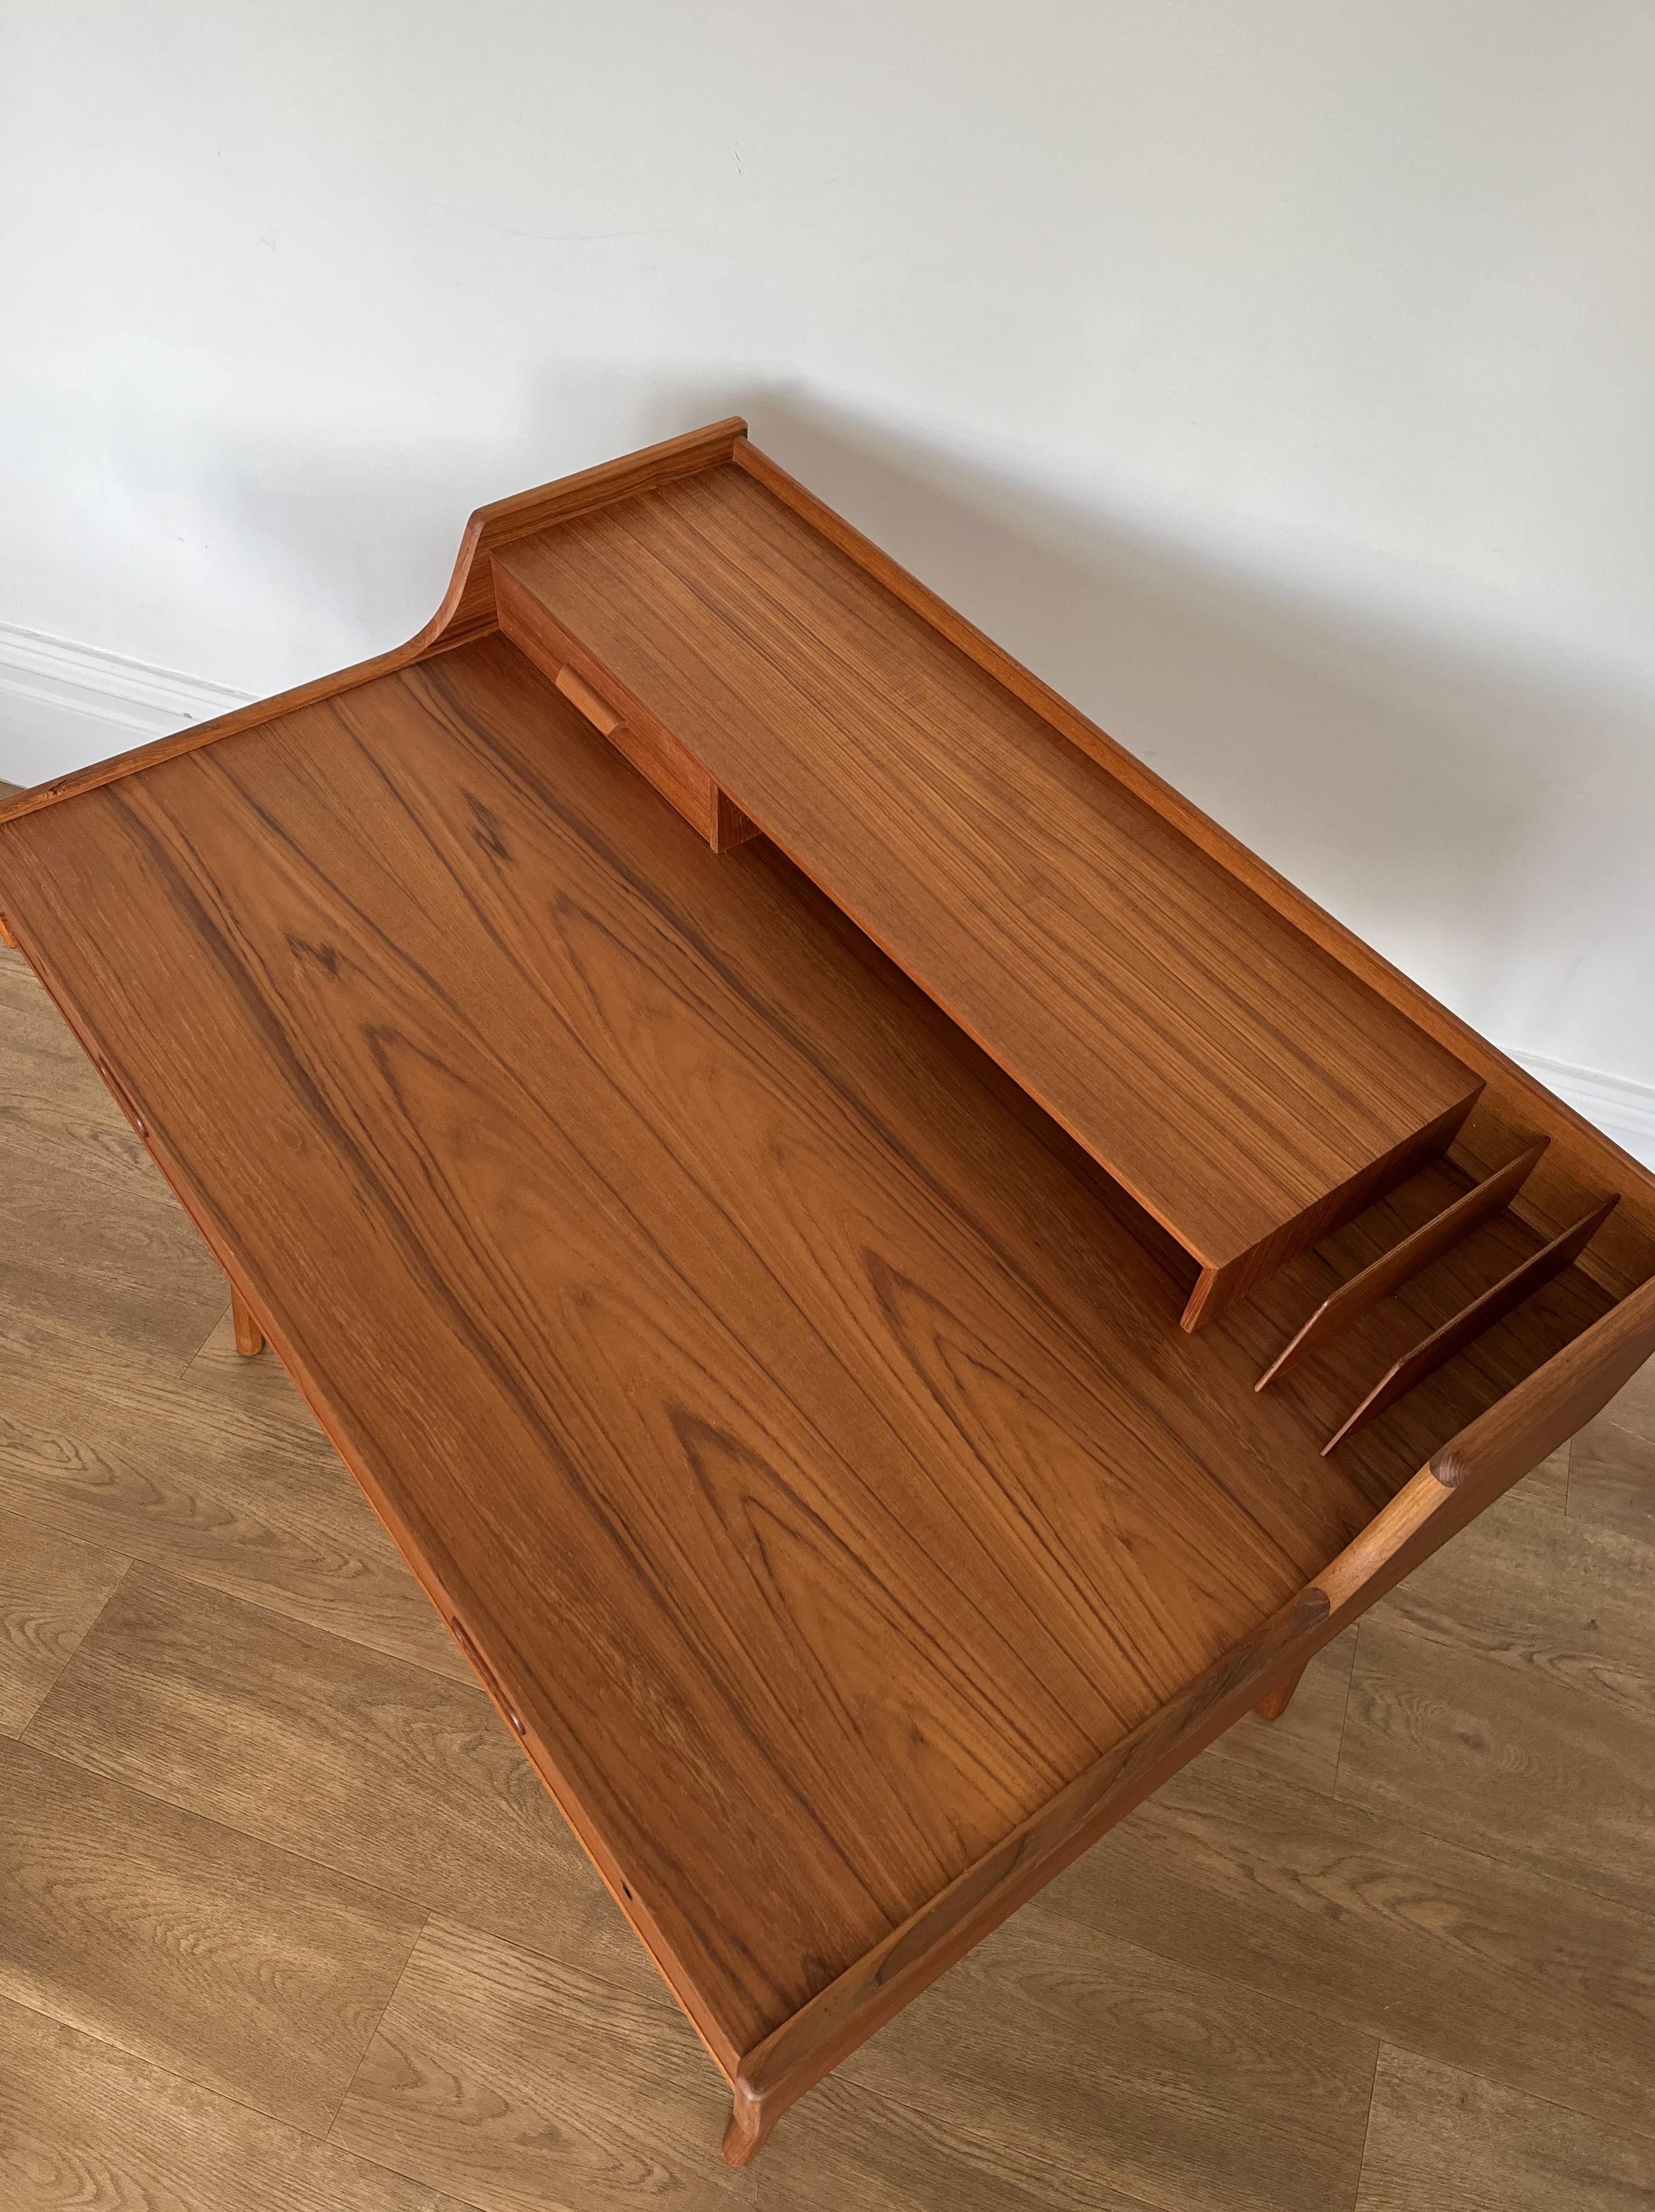 Teak, Model 56 Arne Wahl Iversen desk for Vinde Mobelfabrik.

Superb, nicely proportioned little desk with great detailing.

The desk is also finished to the rear so can stand freely in any space.

The desk has been professionally restored and